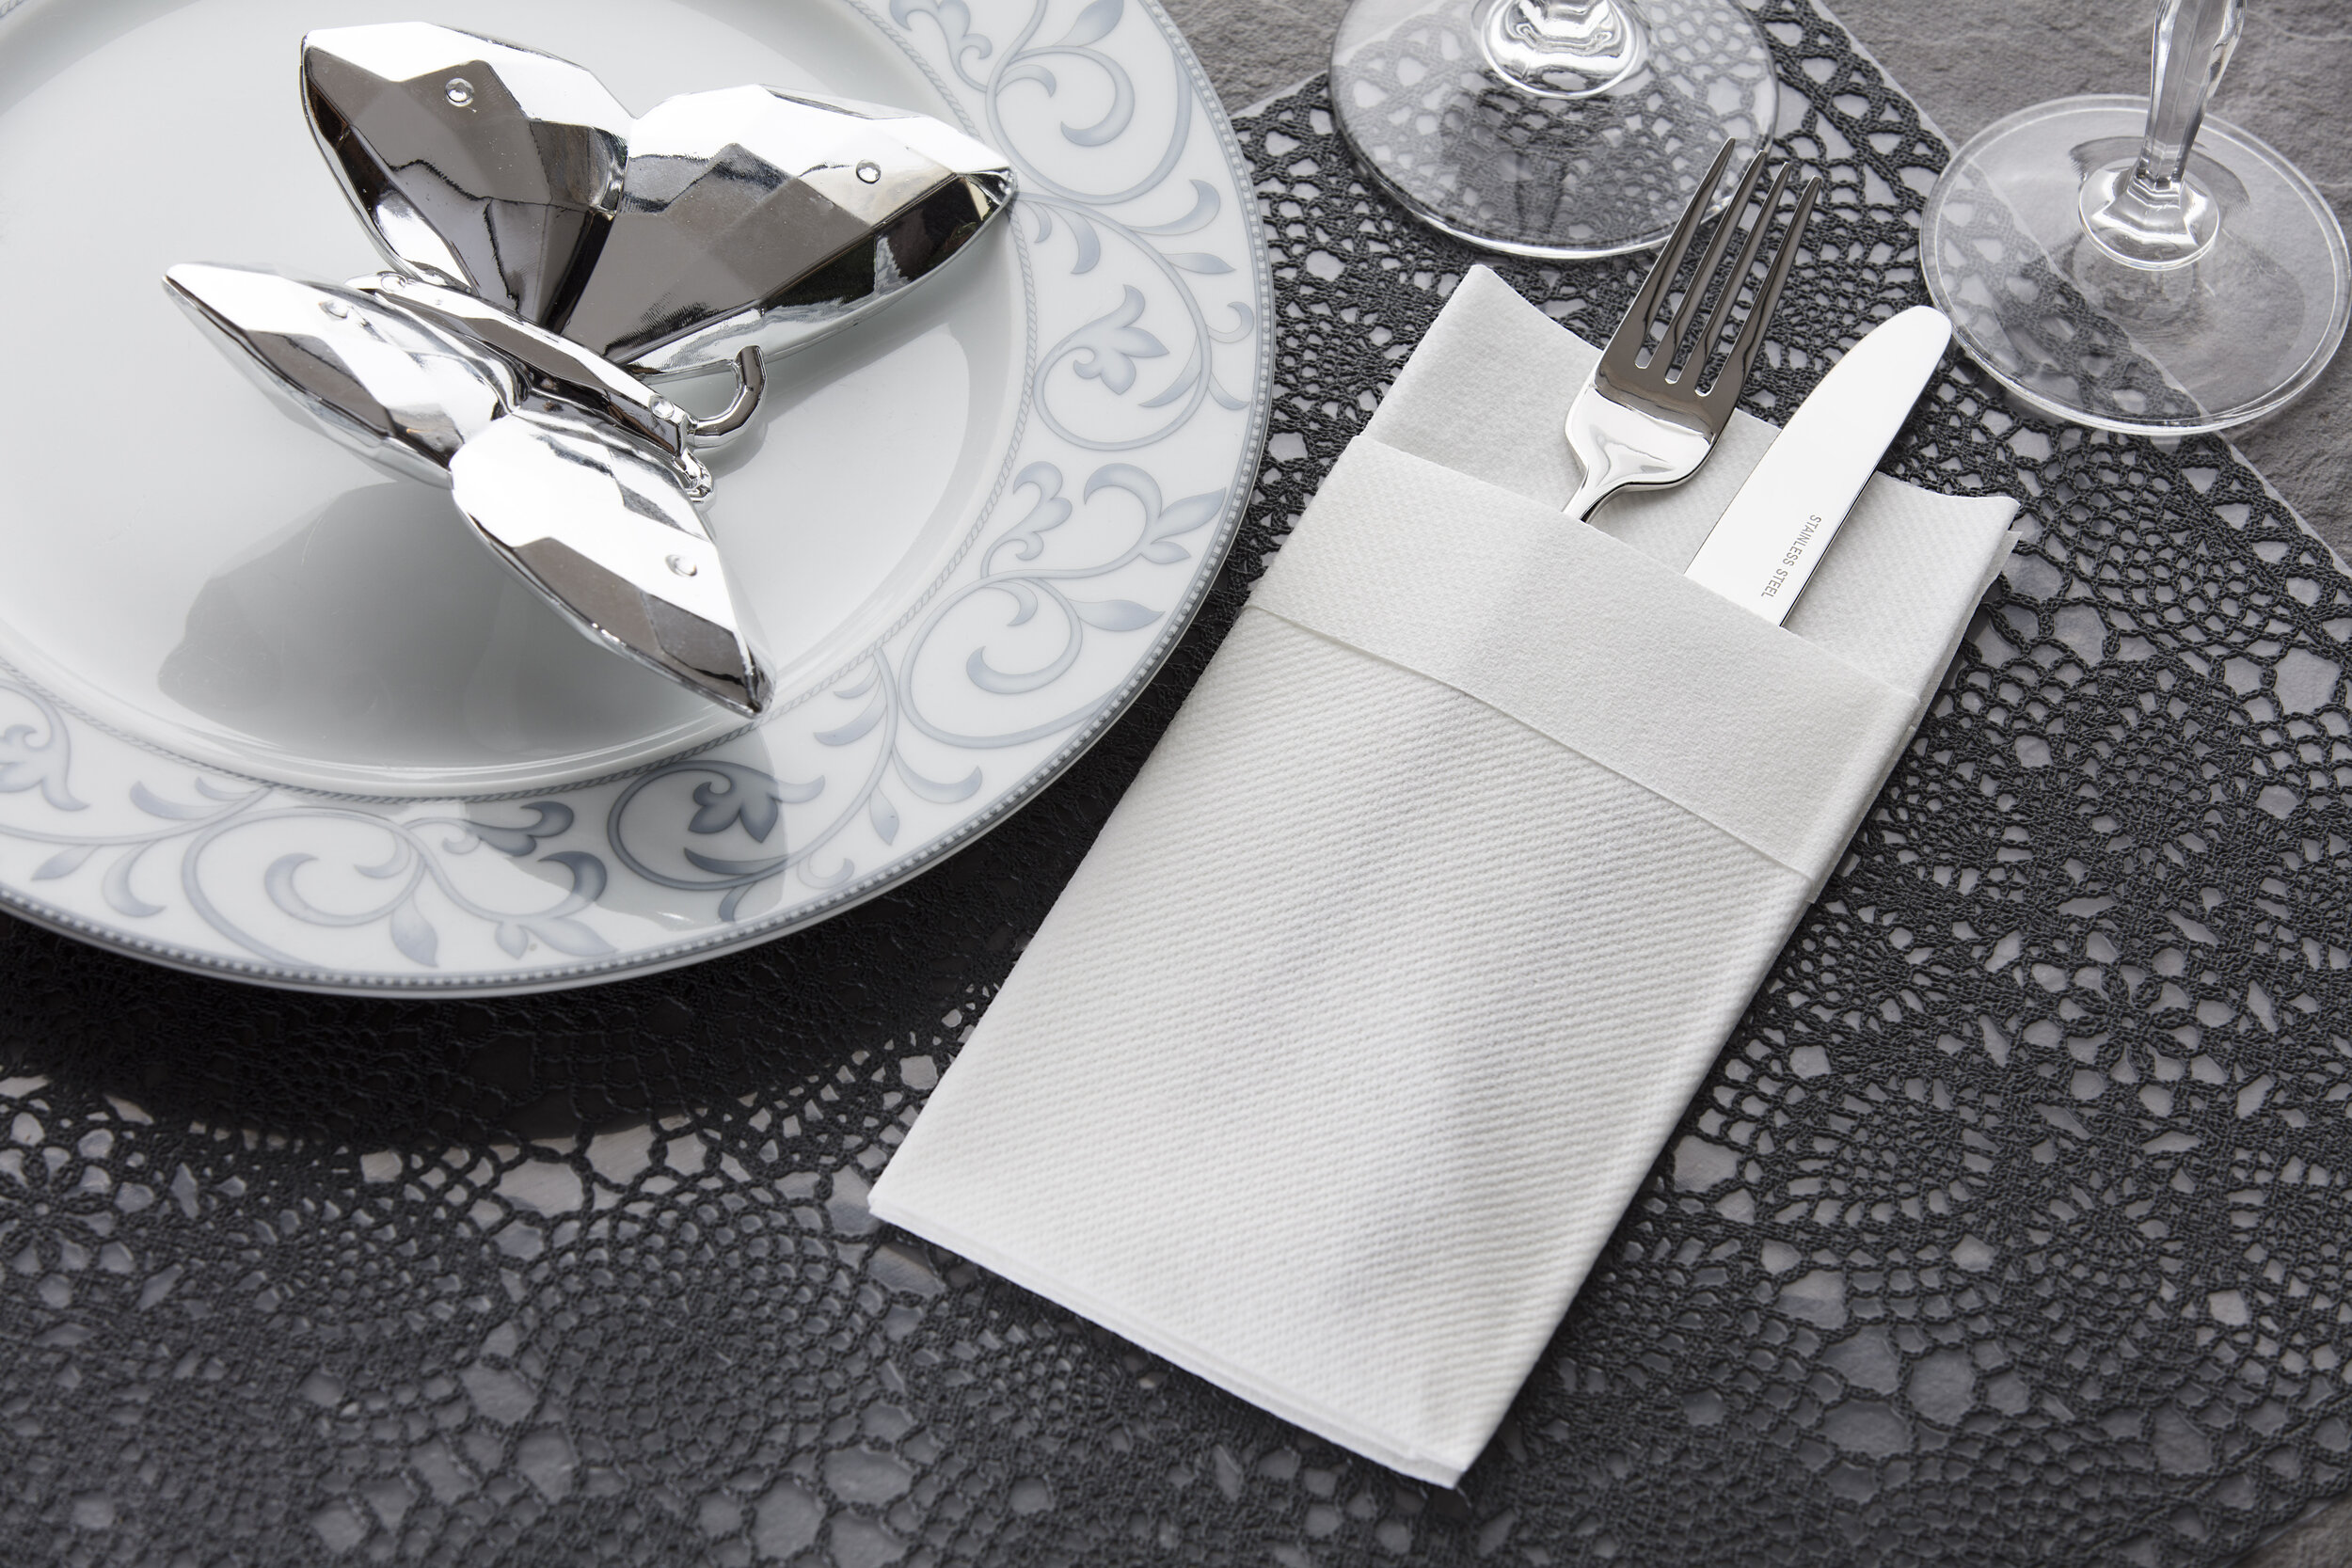 Monogram Disposable Napkins: The 8 Best Ways To Add Elegance To Your Table